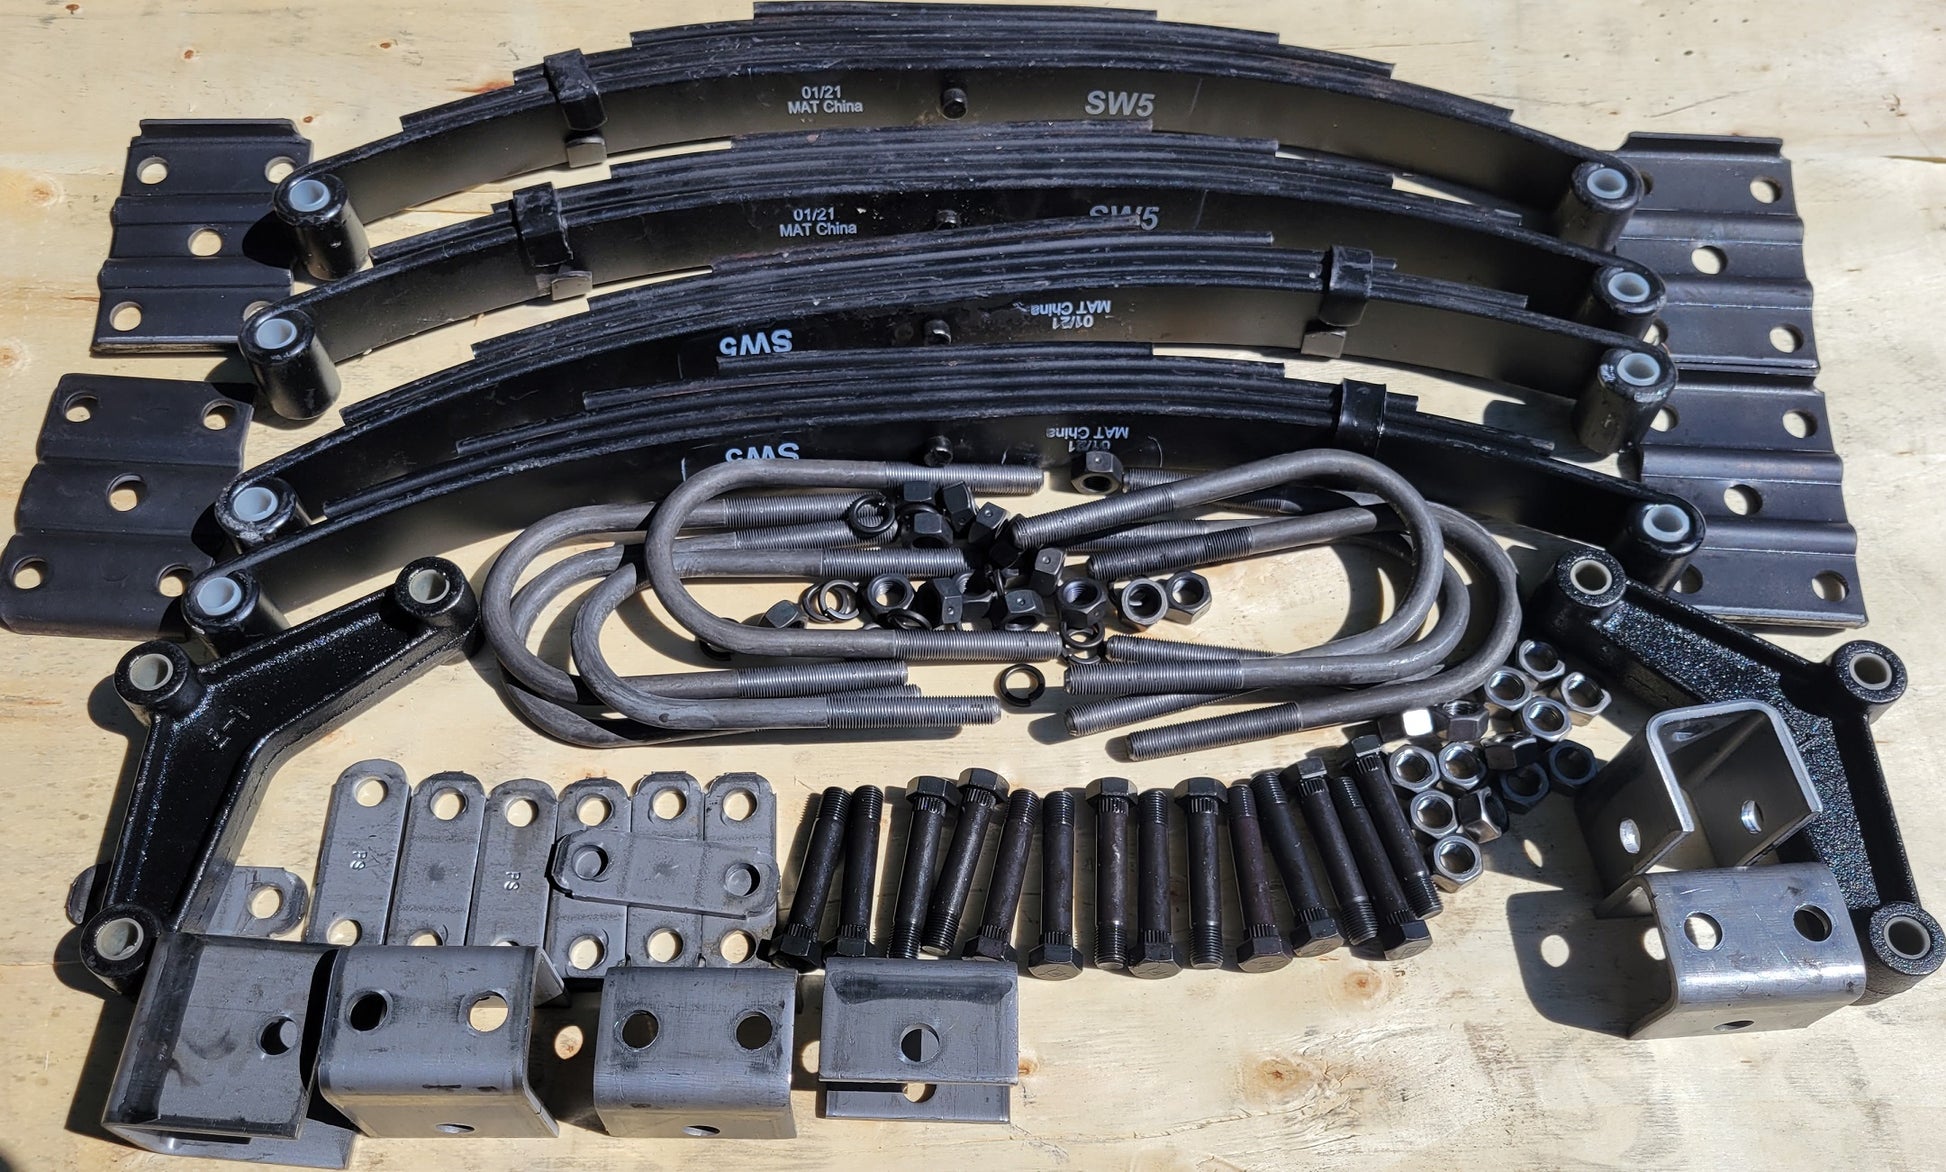 Double Eye Single Axle Hanger Kit - Short Hangers - For 1 3/4 Wide Springs  - Equalizer Kits - Equalizers - Equalizers & Suspension Parts - Products